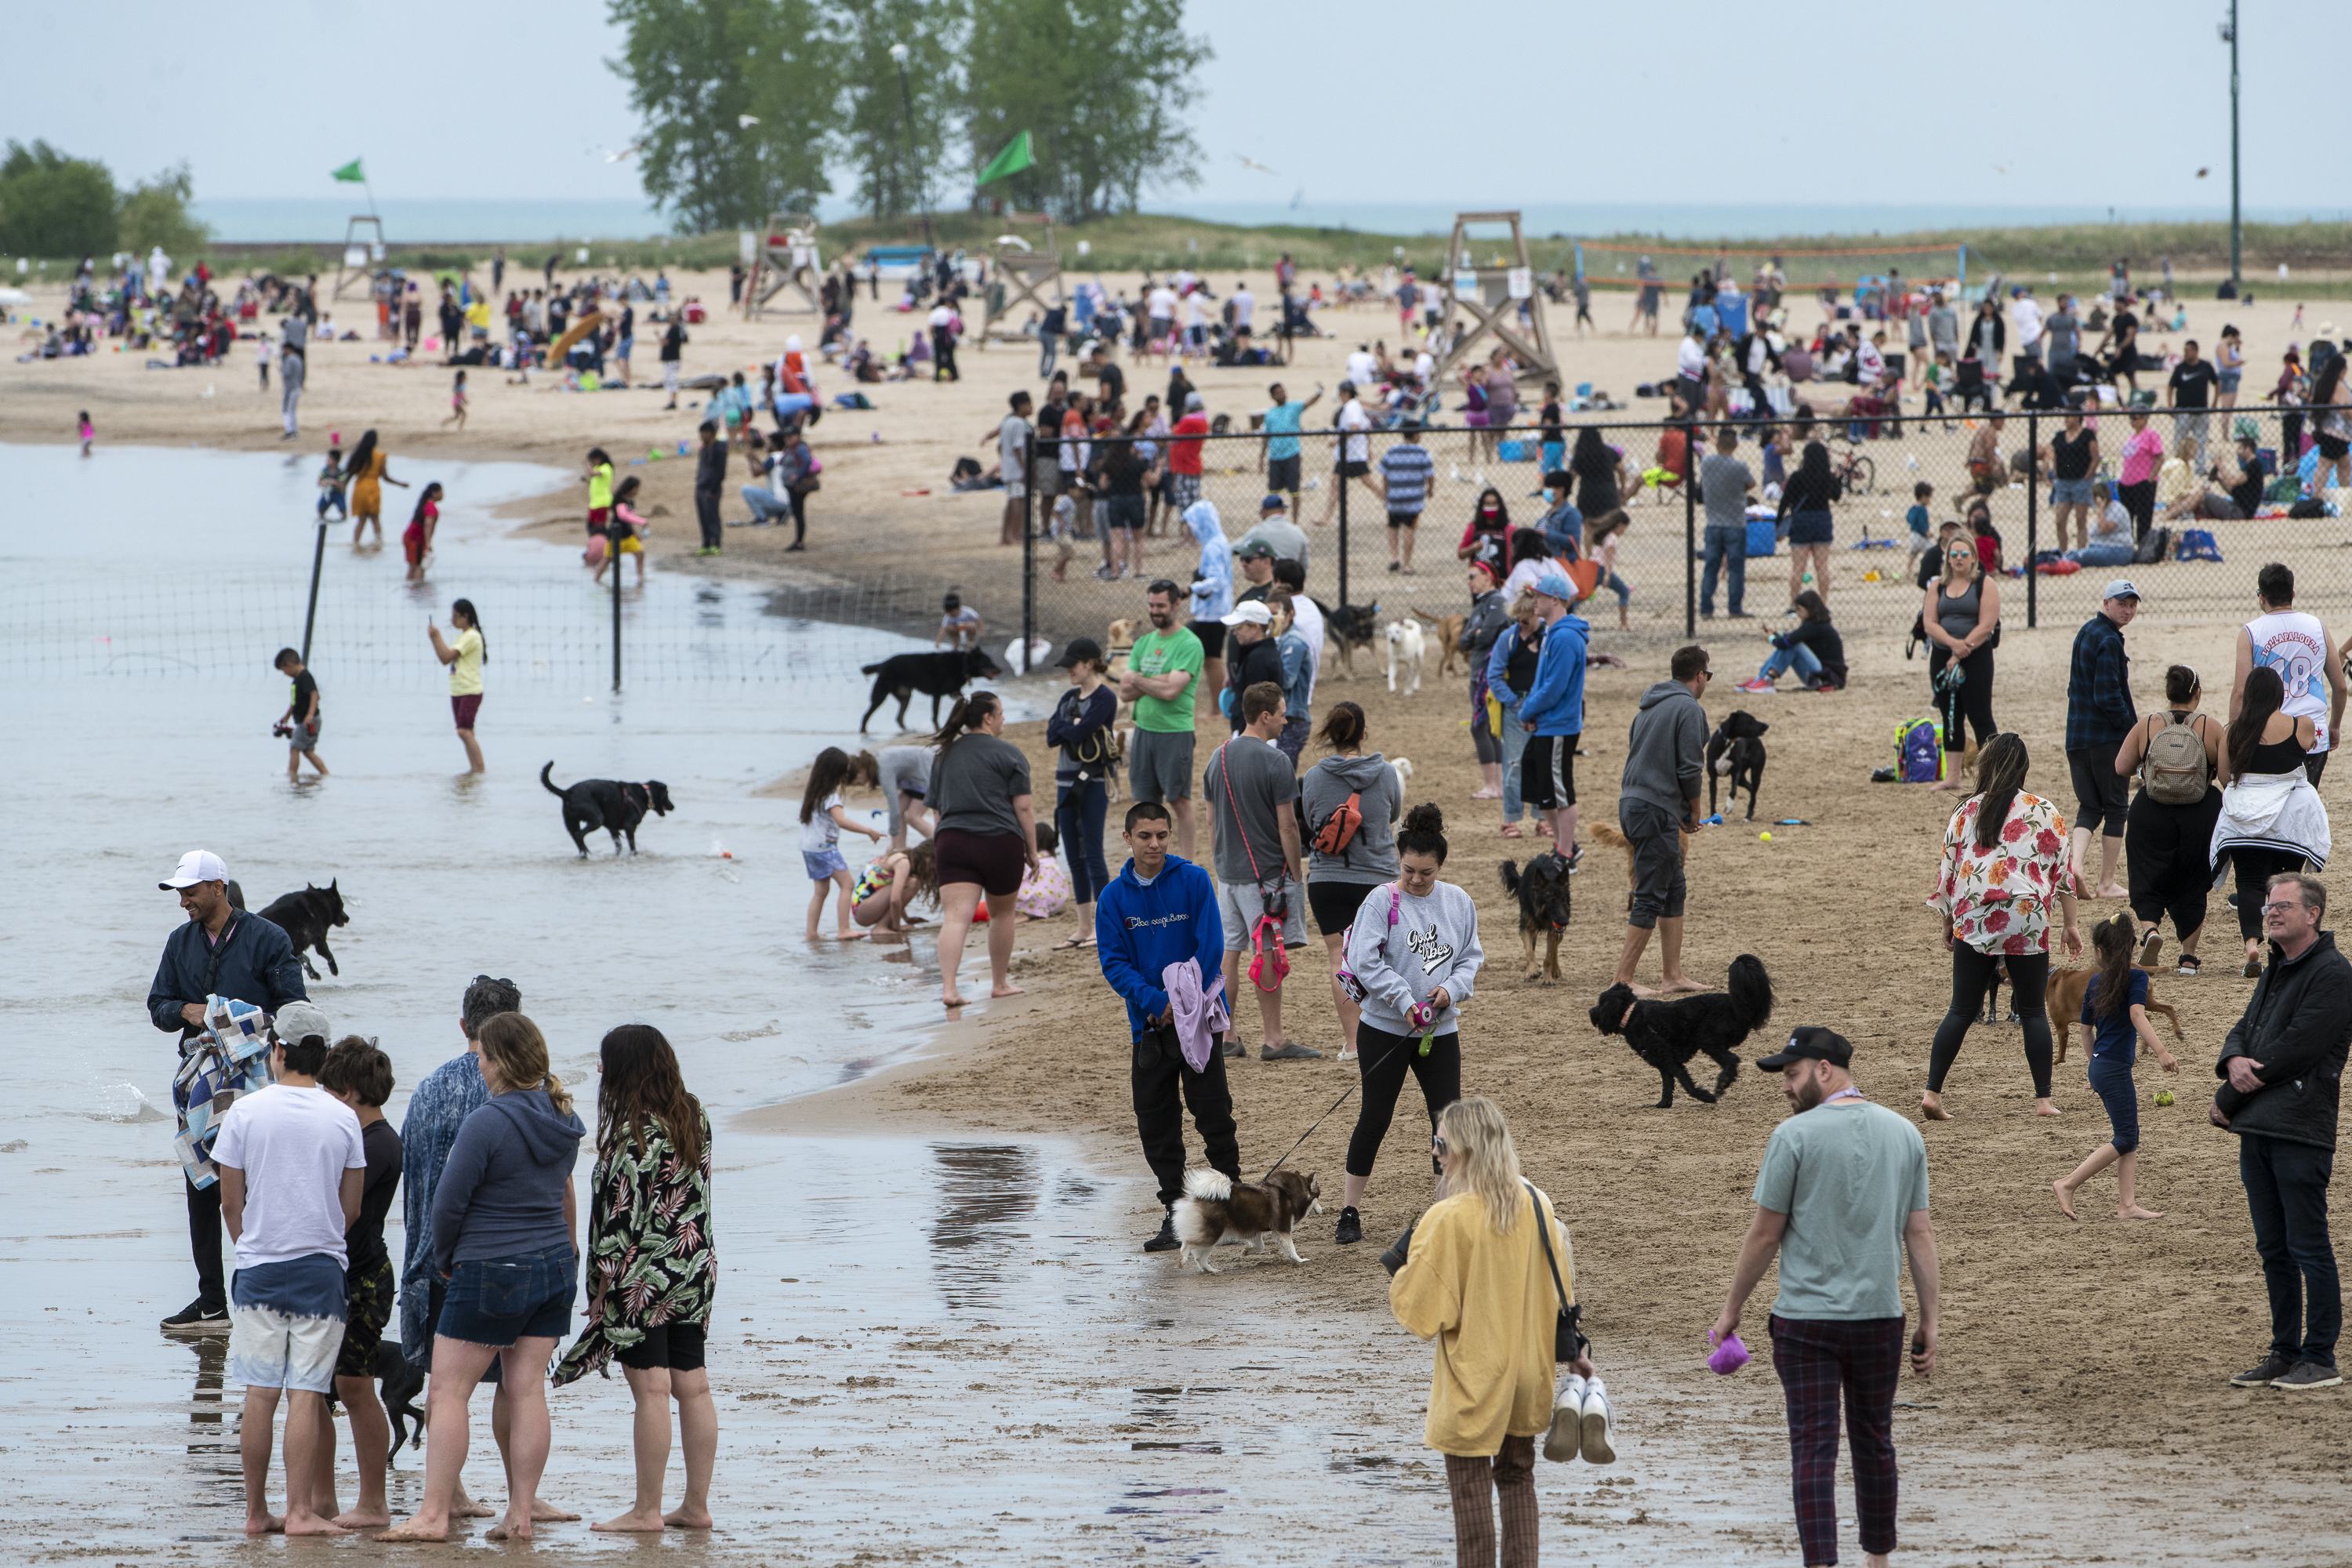 People play catch and let their dogs loose at the dog-friendly area of Montrose Beach on Monday, May 31, 2021.